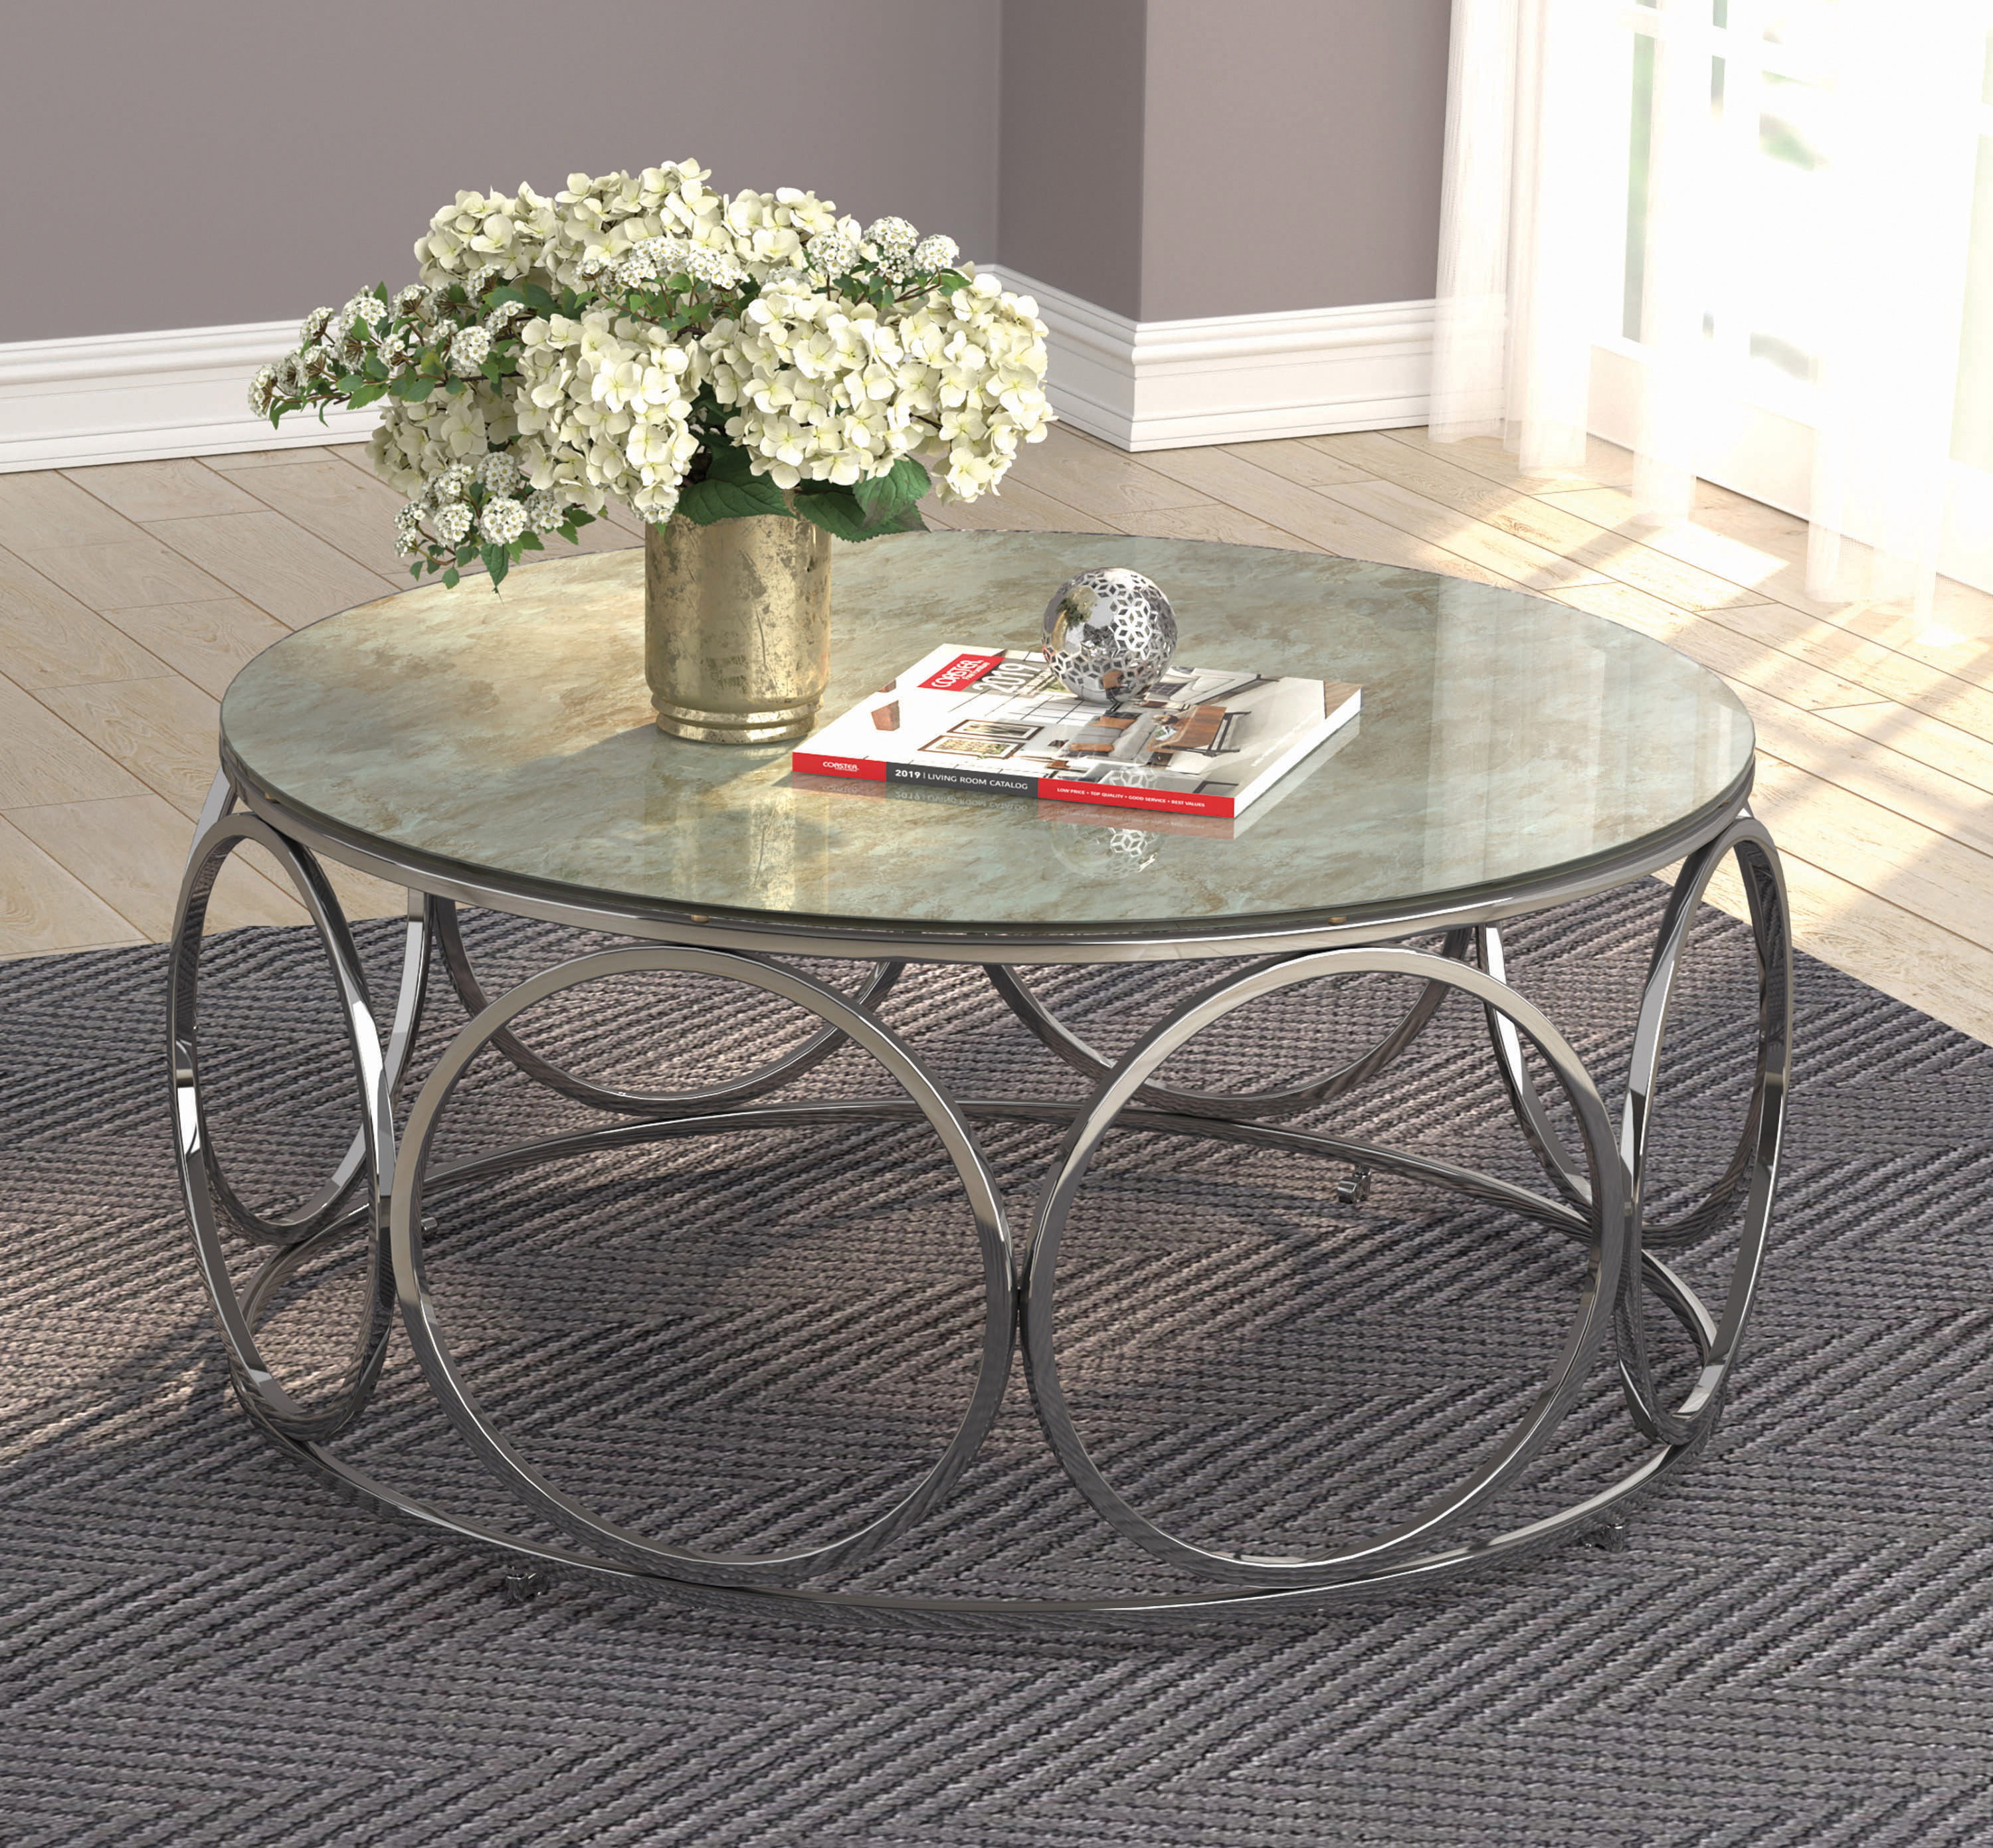 Round Coffee Table with Casters Beige Marble and Chrome - Walmart.com